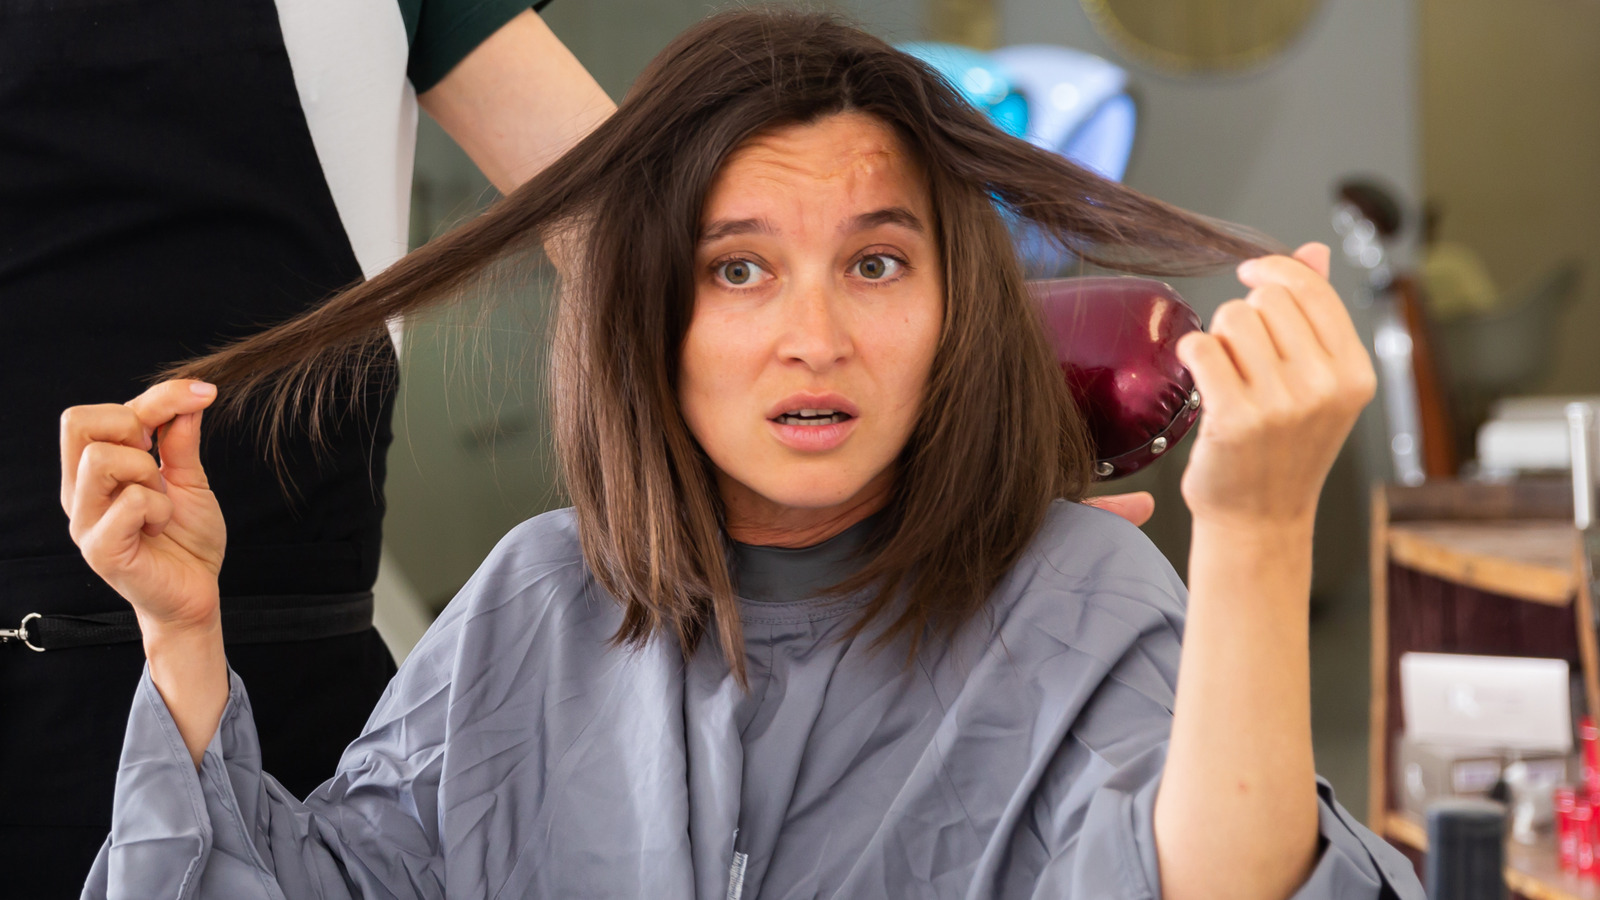 So You Hate Your New Hair Color. Here's How To Fix It Without Damaging Your  Hair